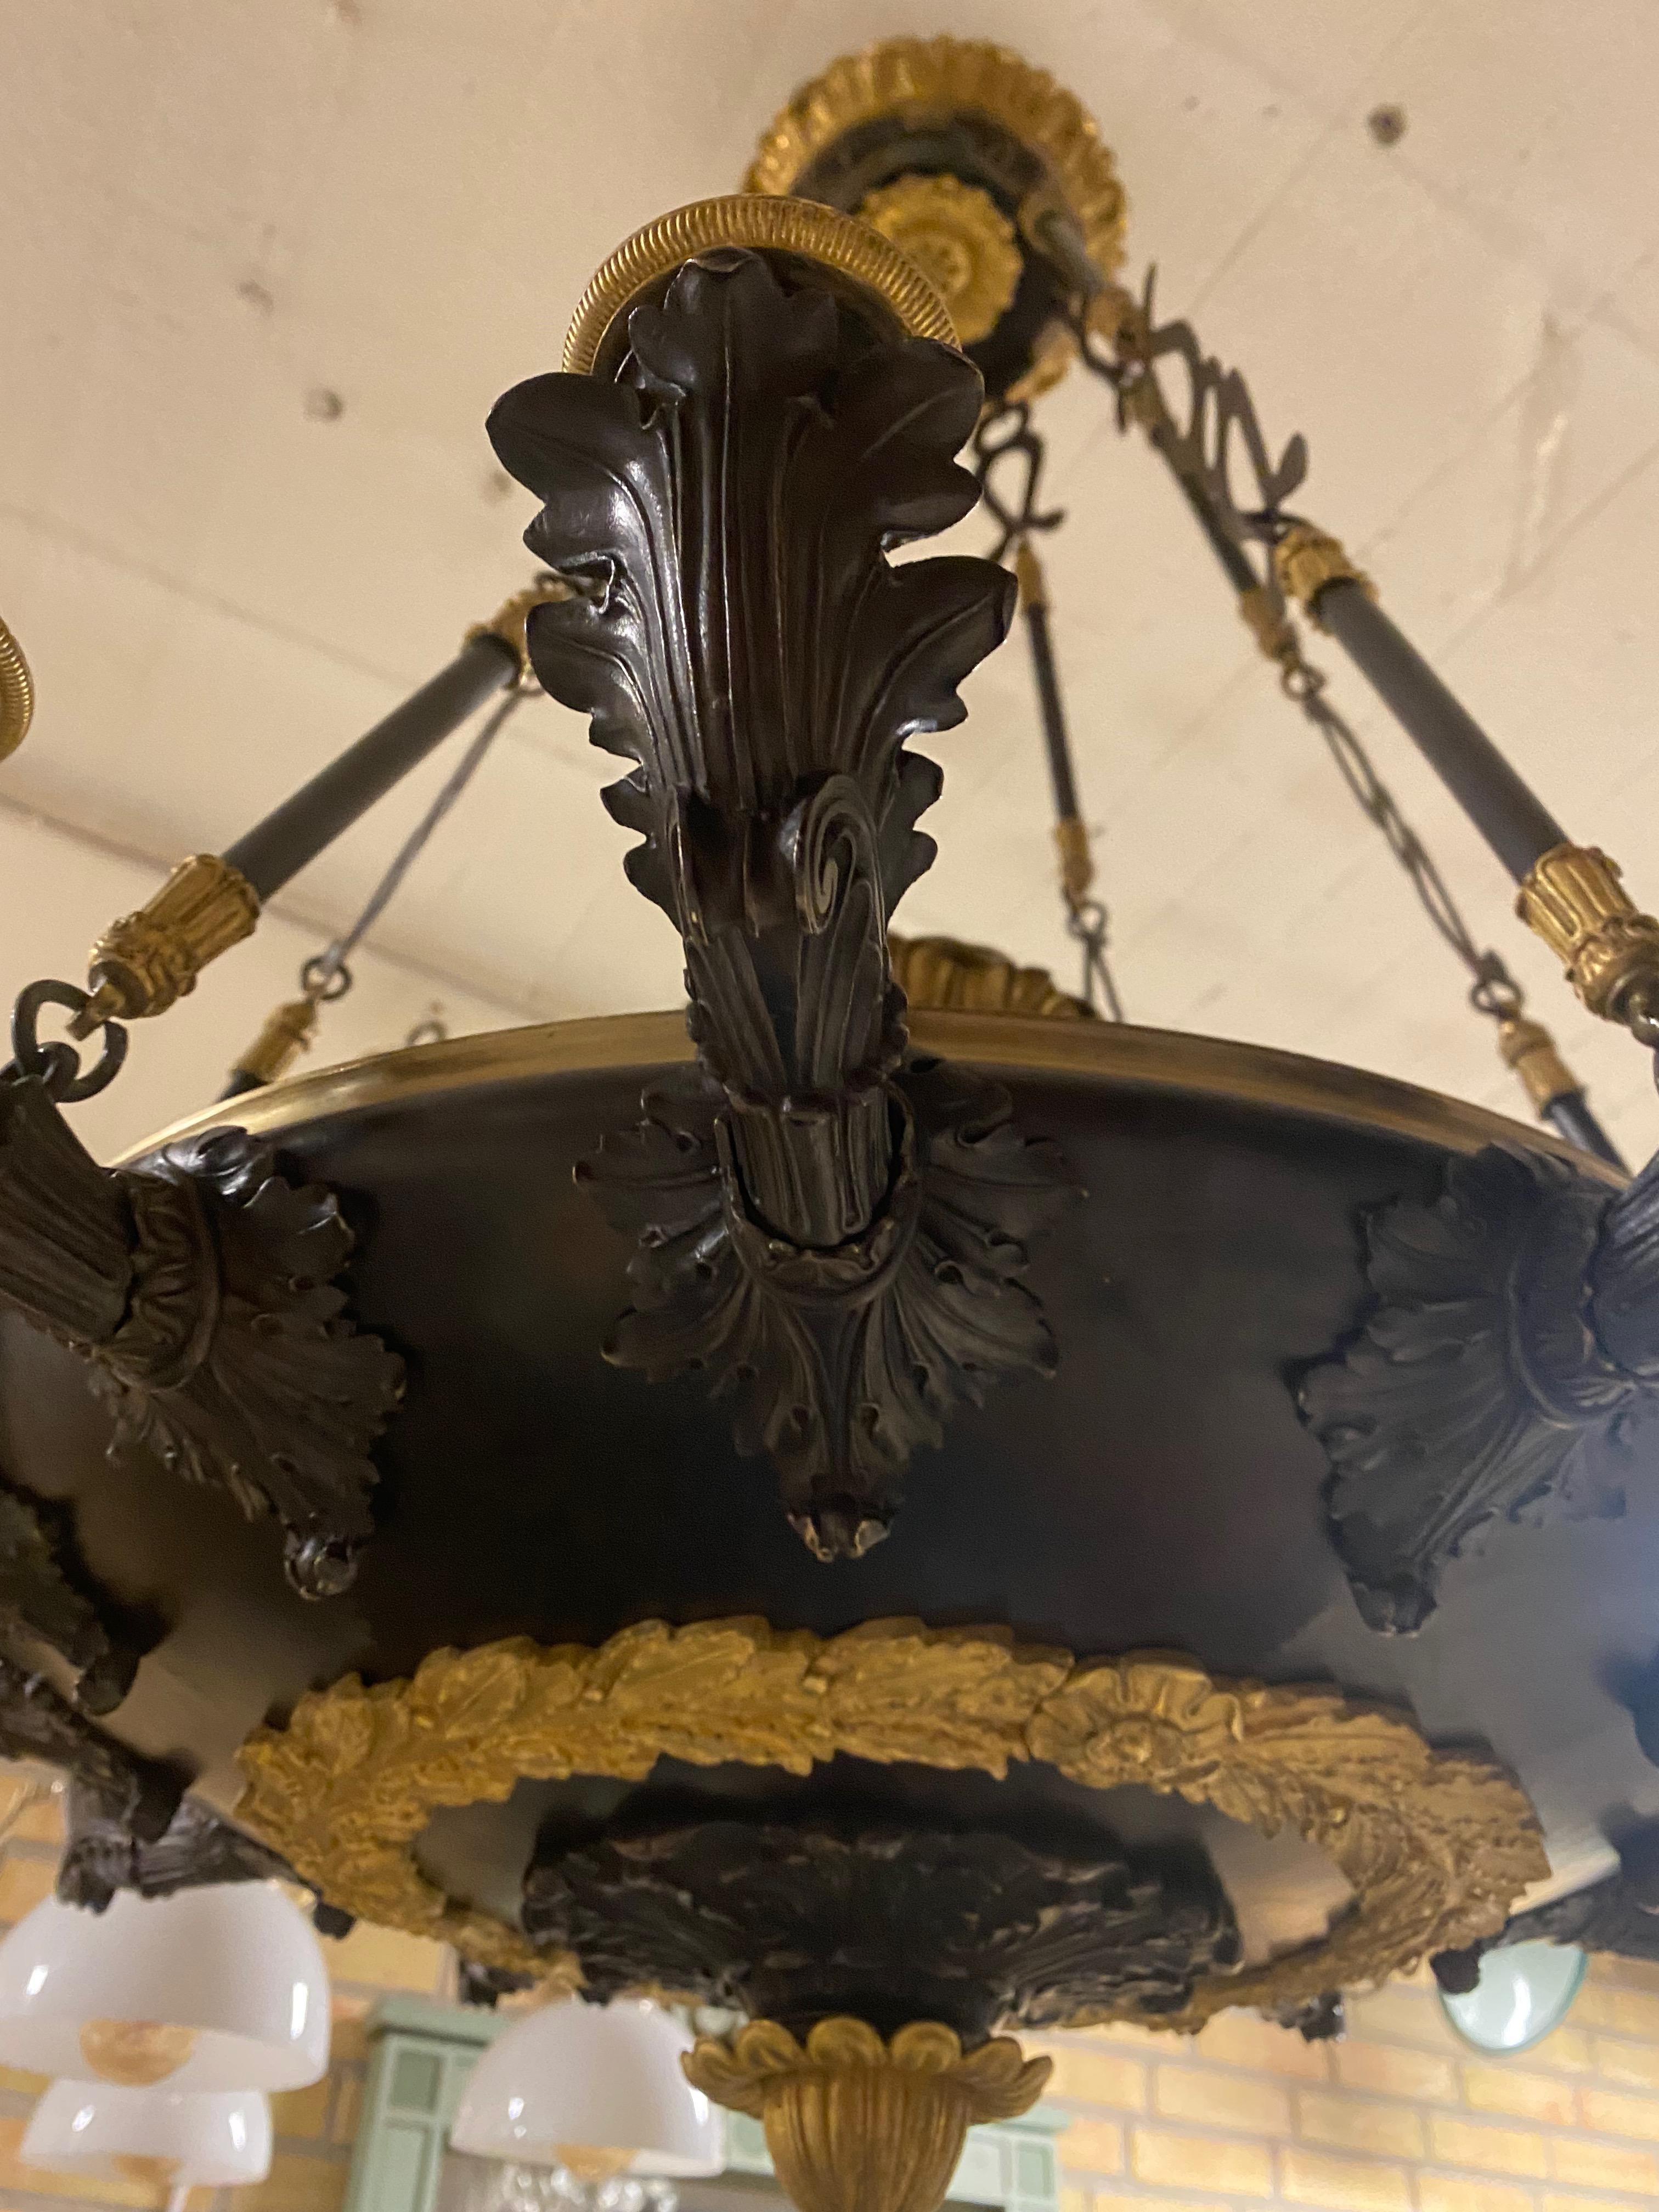 A large twelve armed chandelier made around 1820-30. The saucer shaped bowl is made of copper and patinated black. The 12 candlers are all cast of bronze and patinated black. 
A great piece for any interior. It is not electrified but this can be